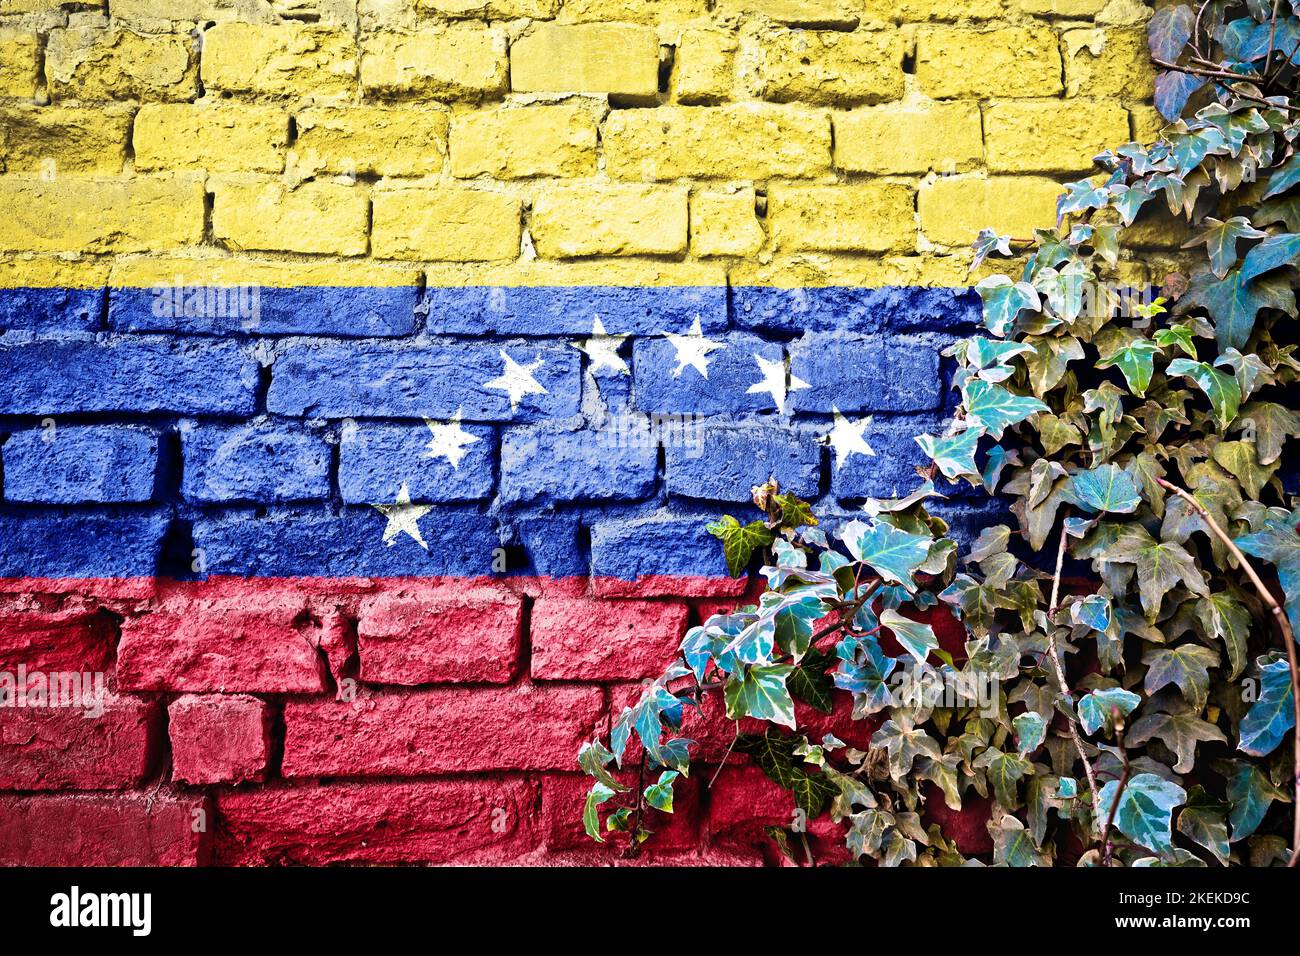 Venezuela grunge flag on brick wall with ivy plant, country symbol concept Stock Photo